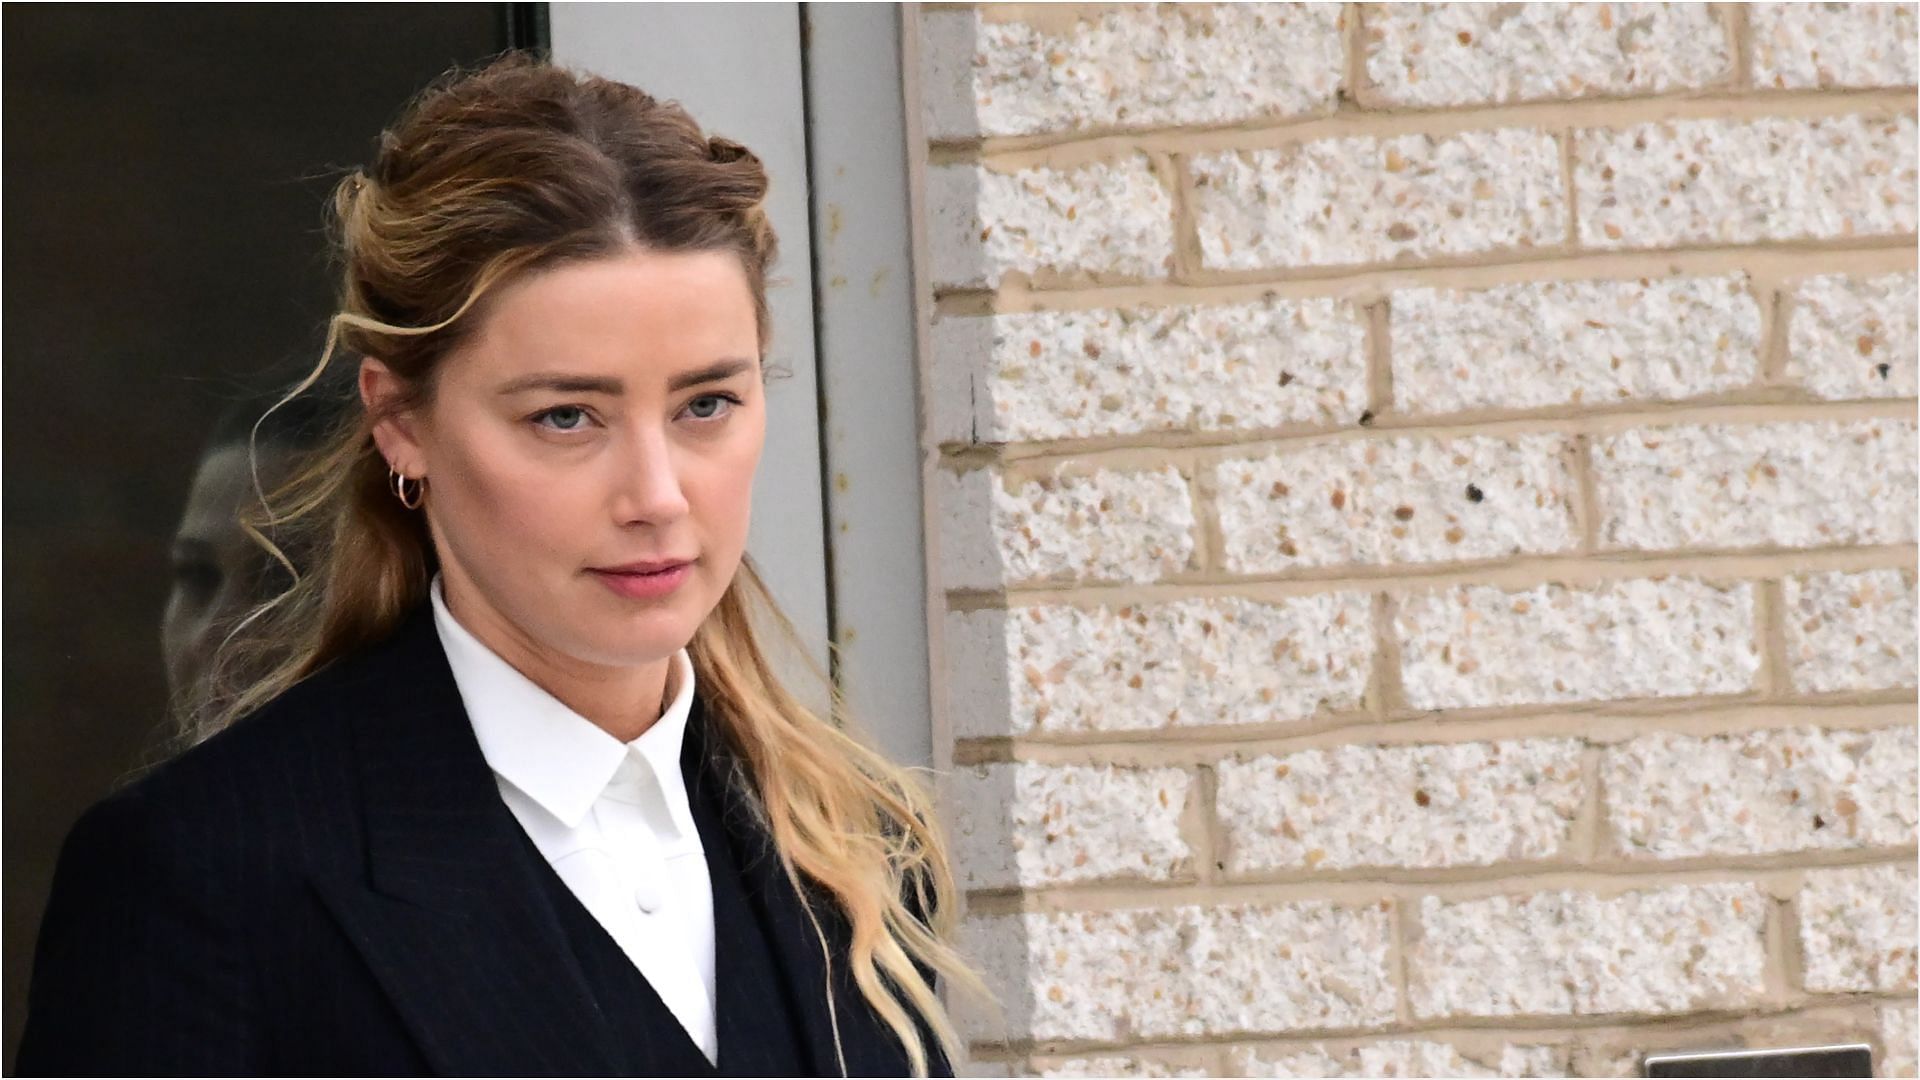 Amber Heard lost her high-profile defamation case to ex-husband Johnny Depp. (Image via Getty Images/Consolidated News Pictures)